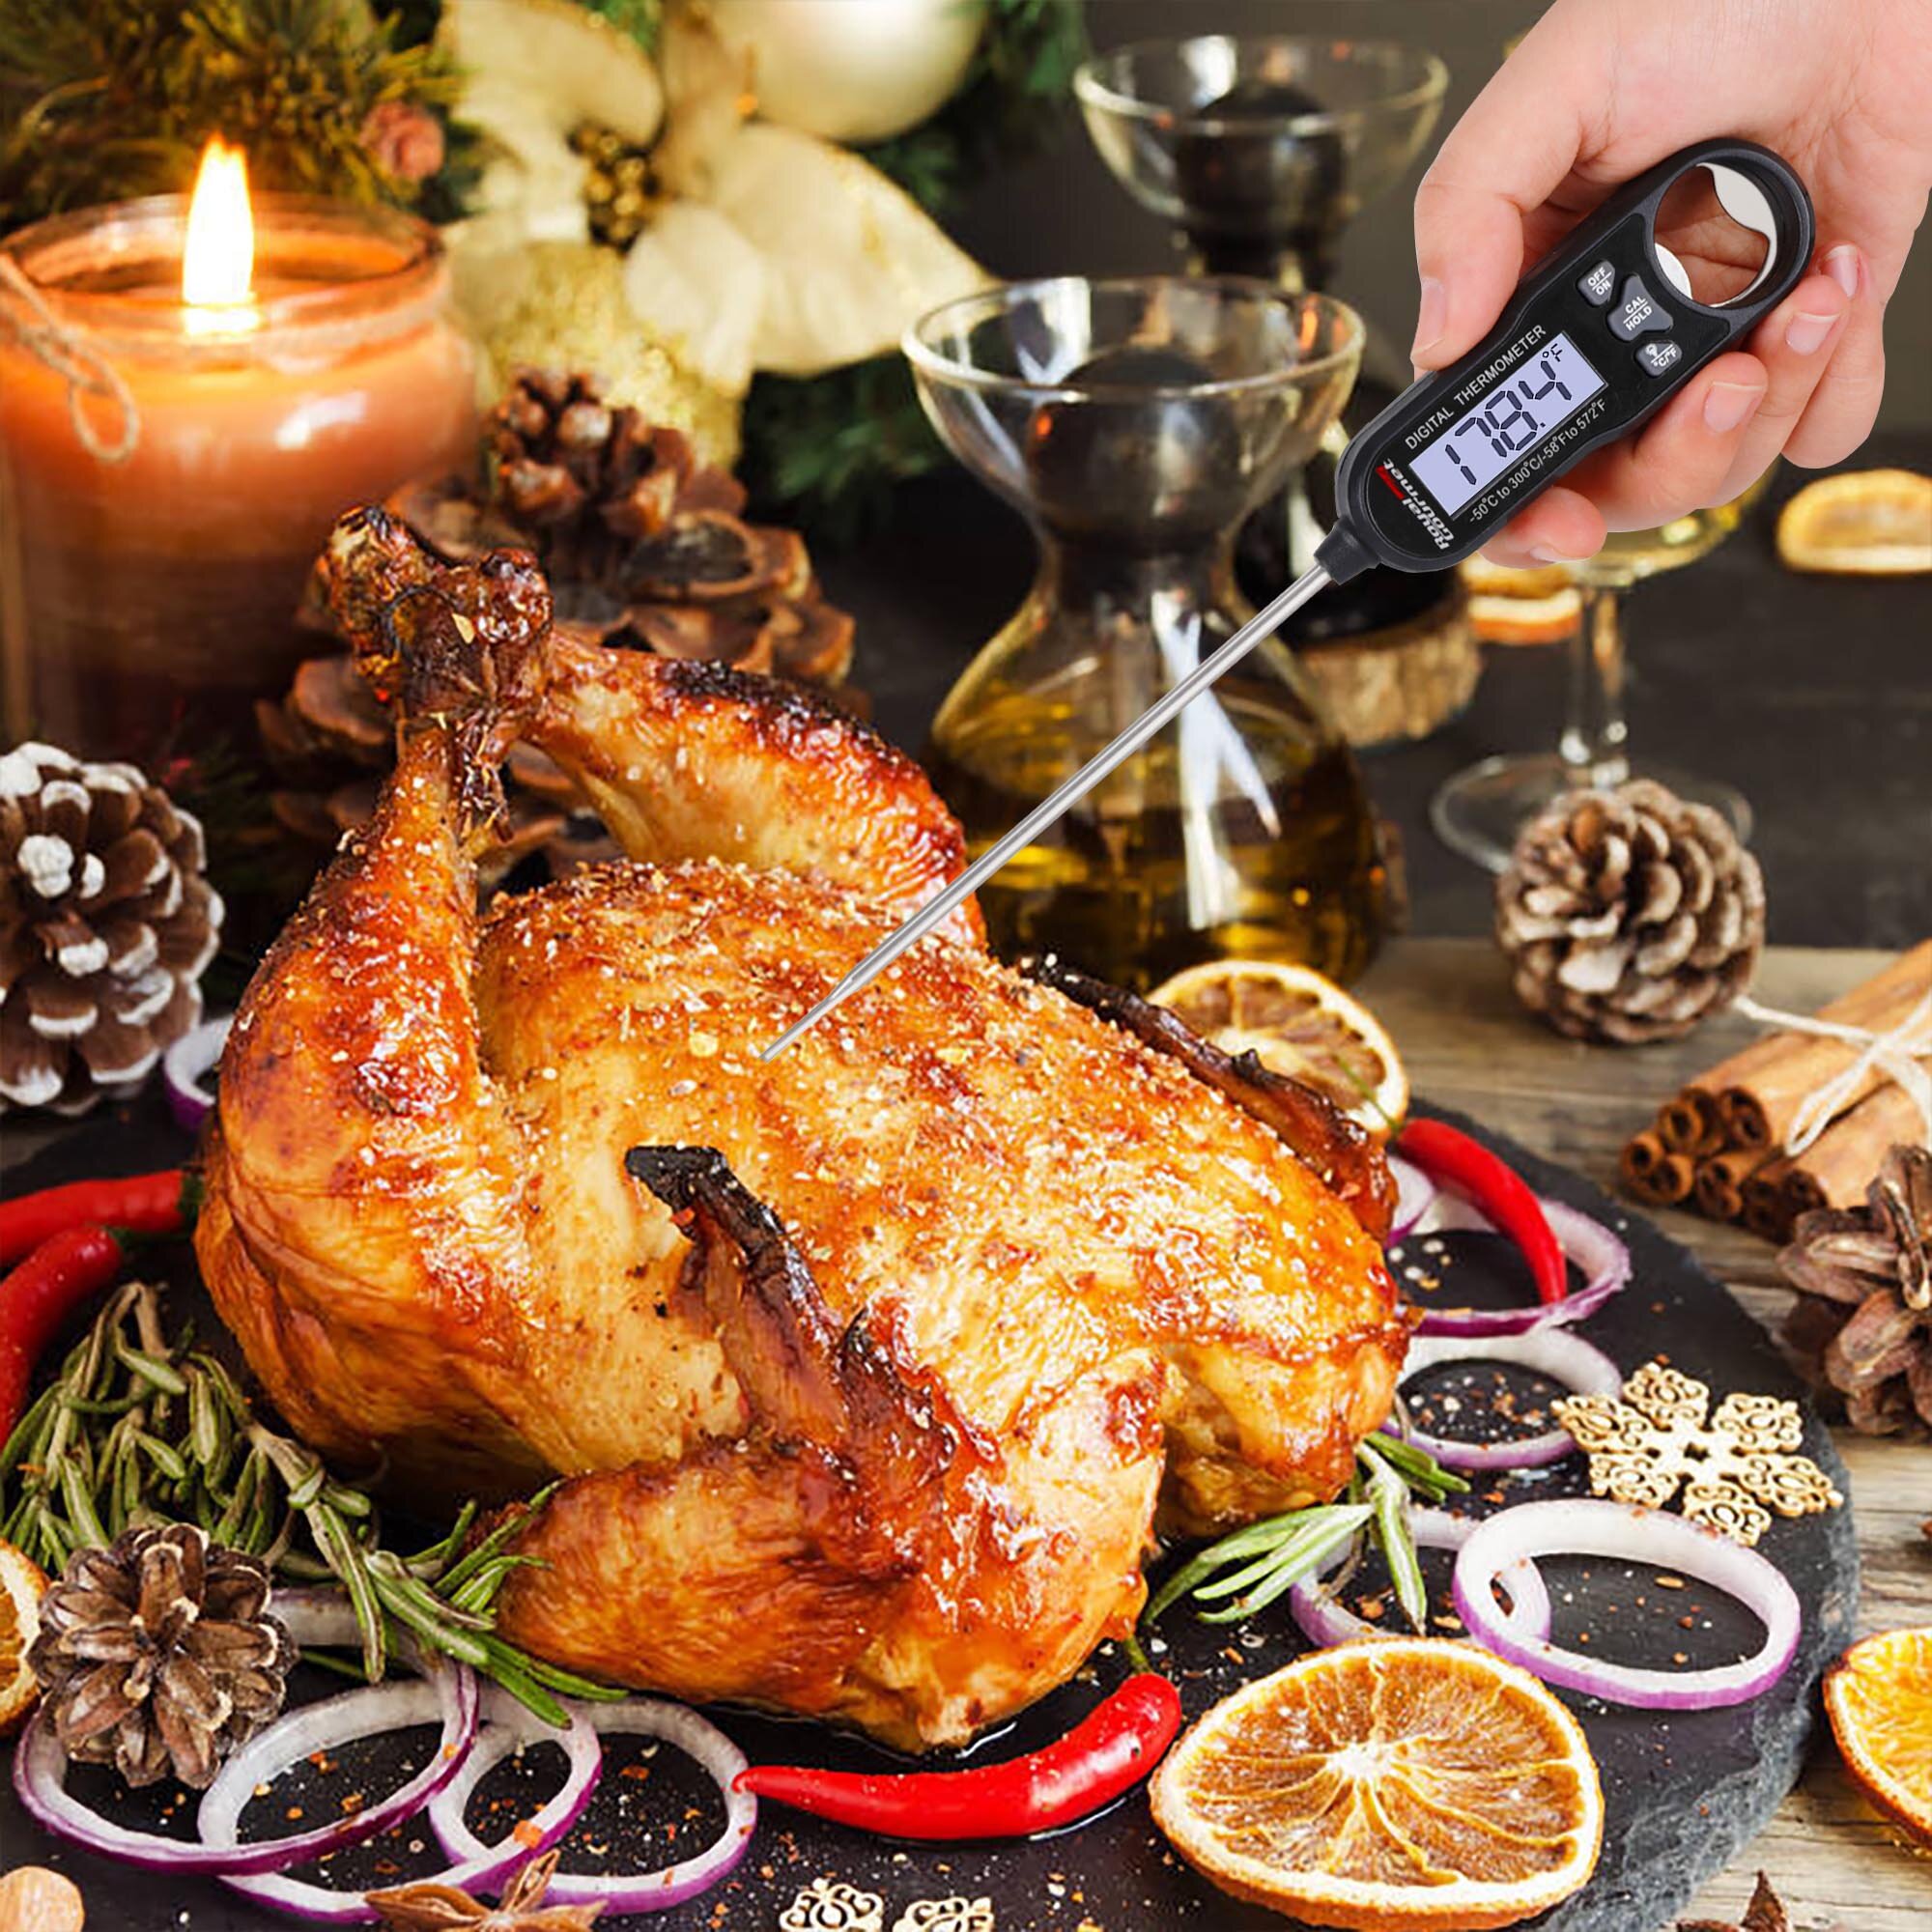 Cheer Collection Quick Read Digital Meat Thermometer